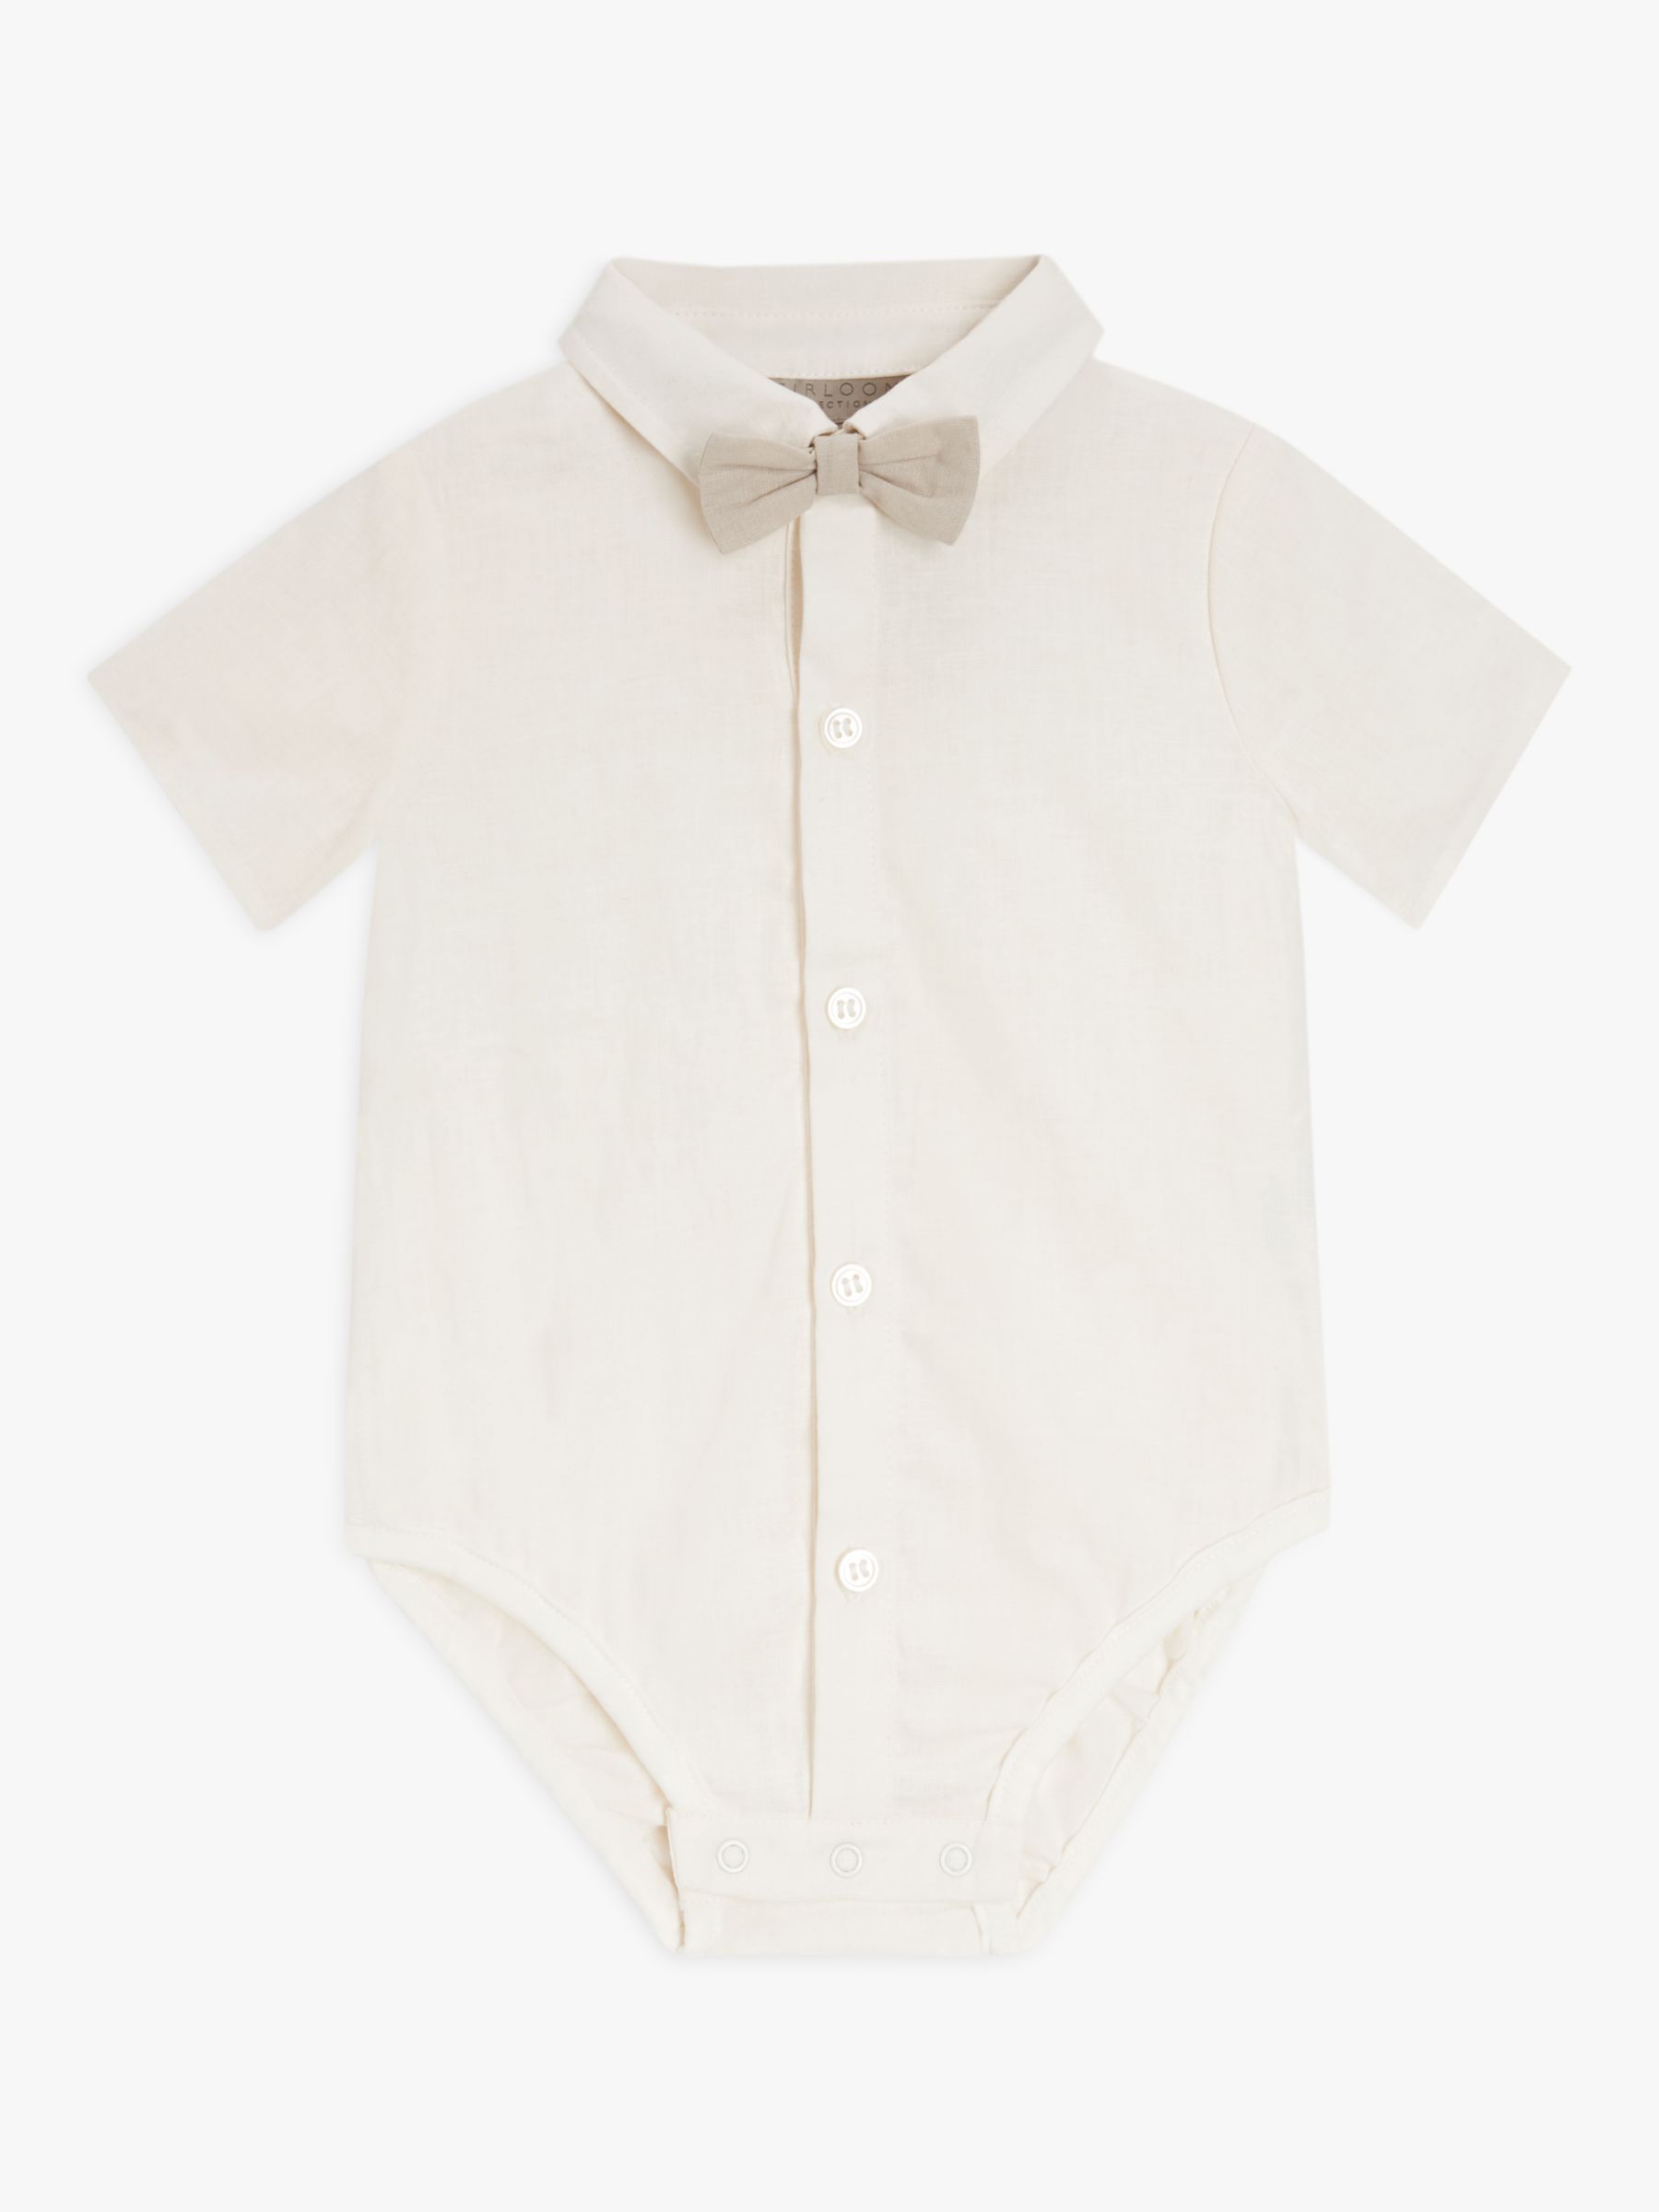 John Lewis Heirloom Collection Baby Linen Bodysuit and Braces Set, White, 12-18 months